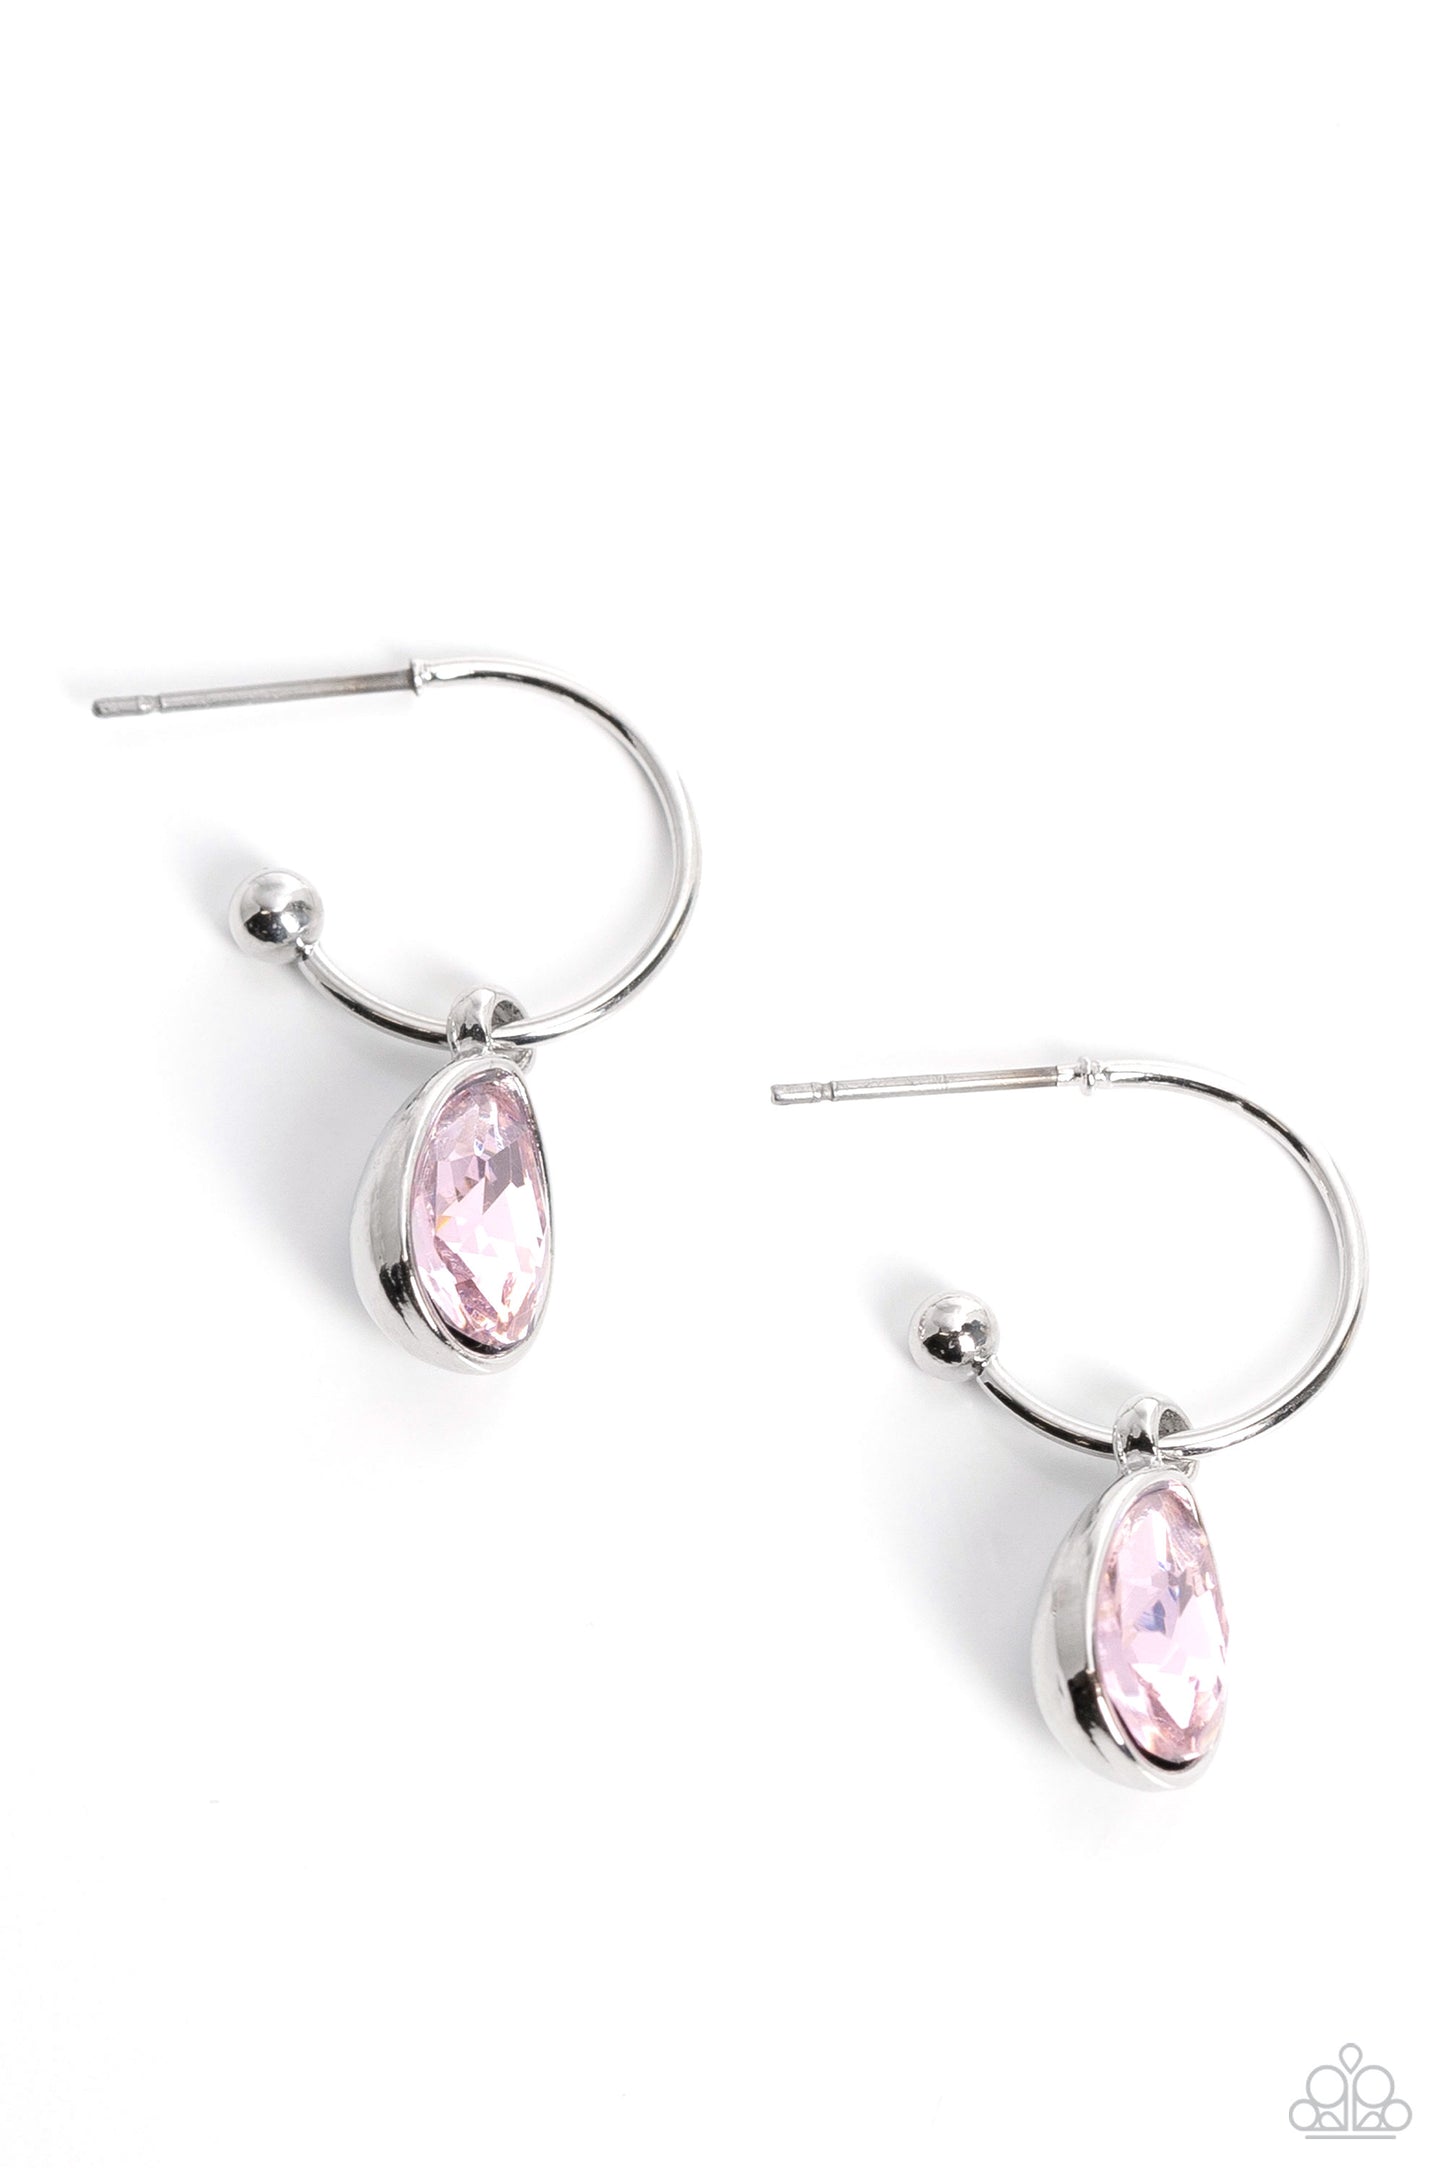 Teardrop Tassel Pink Hoop Earring - Paparazzi Accessories  A small, skinny, shiny silver hoop curves around the ear in a timeless fashion. A shiny silver ball is affixed to the end of the hoop, reminiscent of a barbell fitting. A baby pink, teardrop gem, encased in a shiny silver frame slides along the curvature of the hoop, adding a surprising hint of shimmery movement. Earring attaches to a standard post fitting. Hoop measures approximately 1/2" in diameter. P5HO-PKXX-050XX